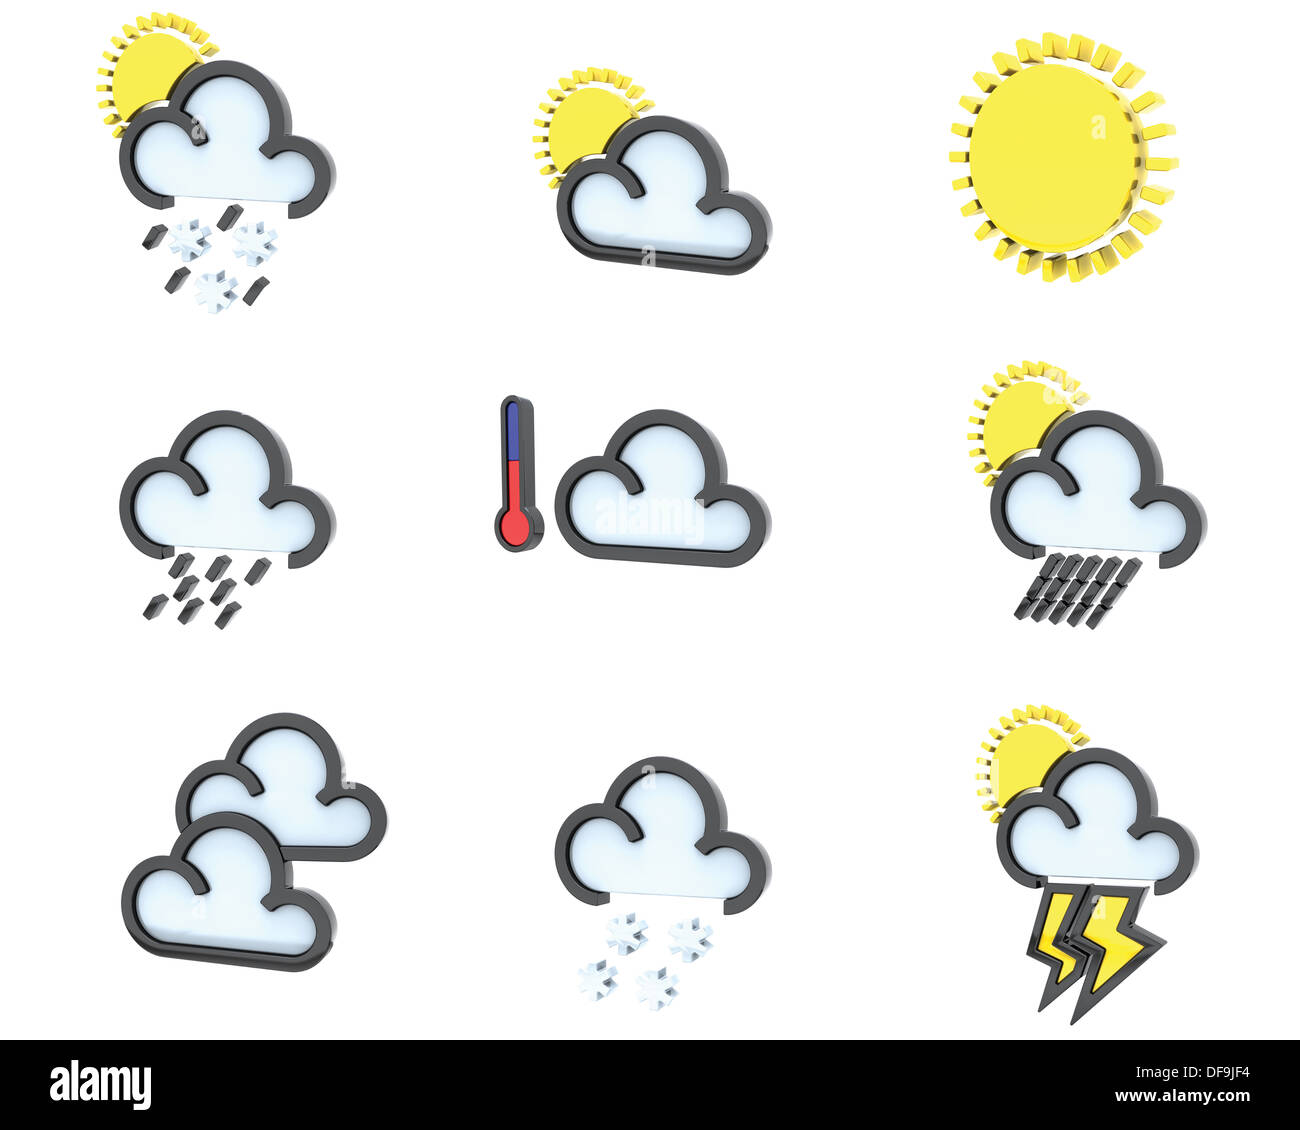 3D Render of weather icons Stock Photo